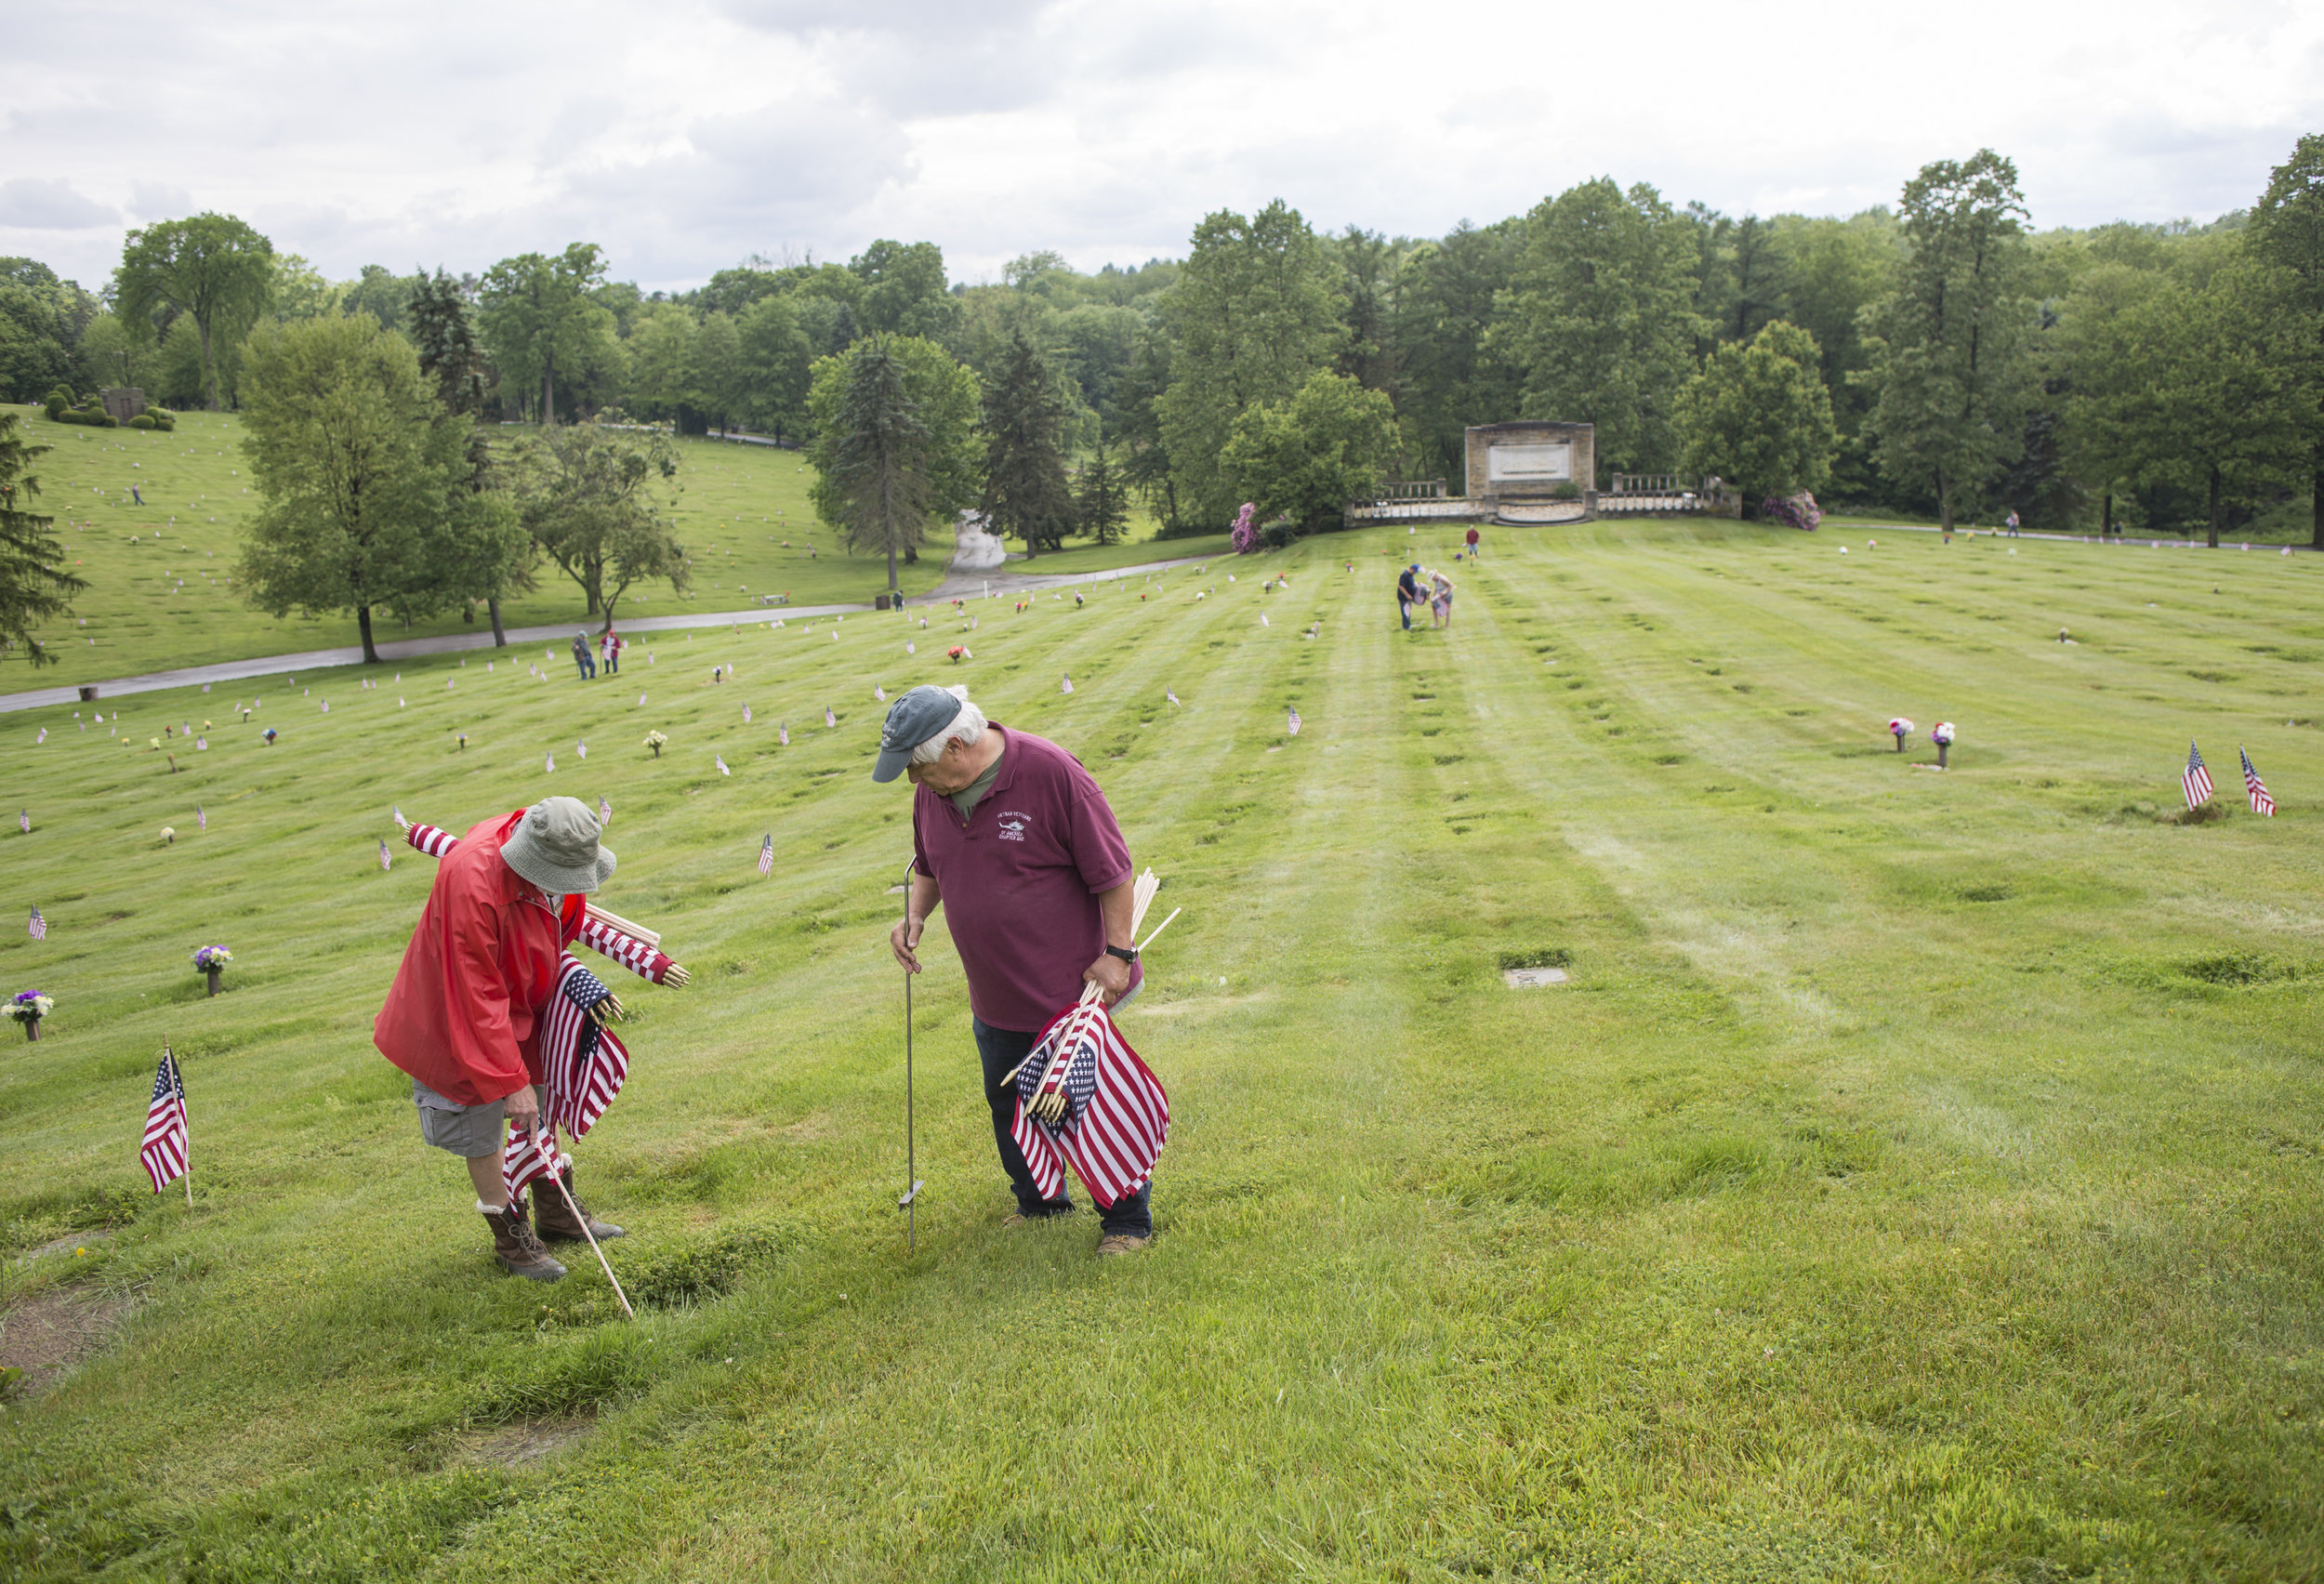  Dave Kane, left, of Patterson, and Larry Googins, of Baden, both members of the Vietnam Veterans of America Chapter 862, the largest VVA chapter in Pennsylvania, place flags on veterans' graves with other members of the VVA and VFW on Thursday at Sy